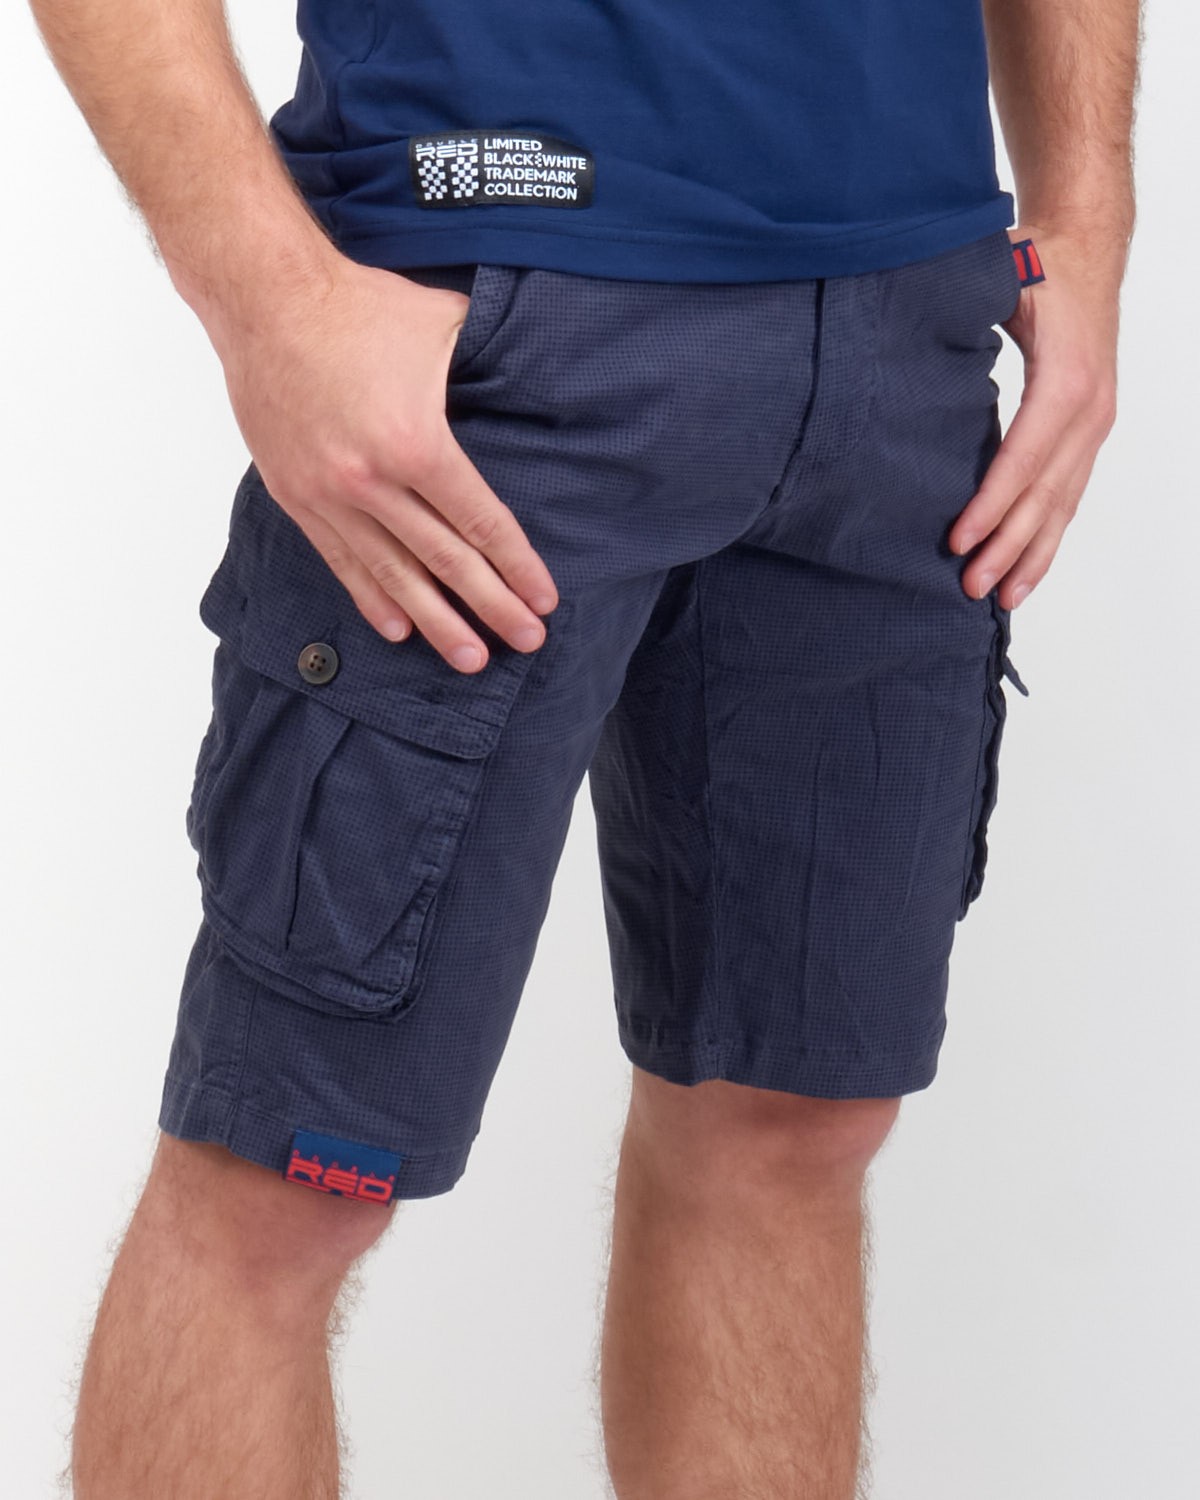 SQUERS Shorts Dark Blue - Double Red